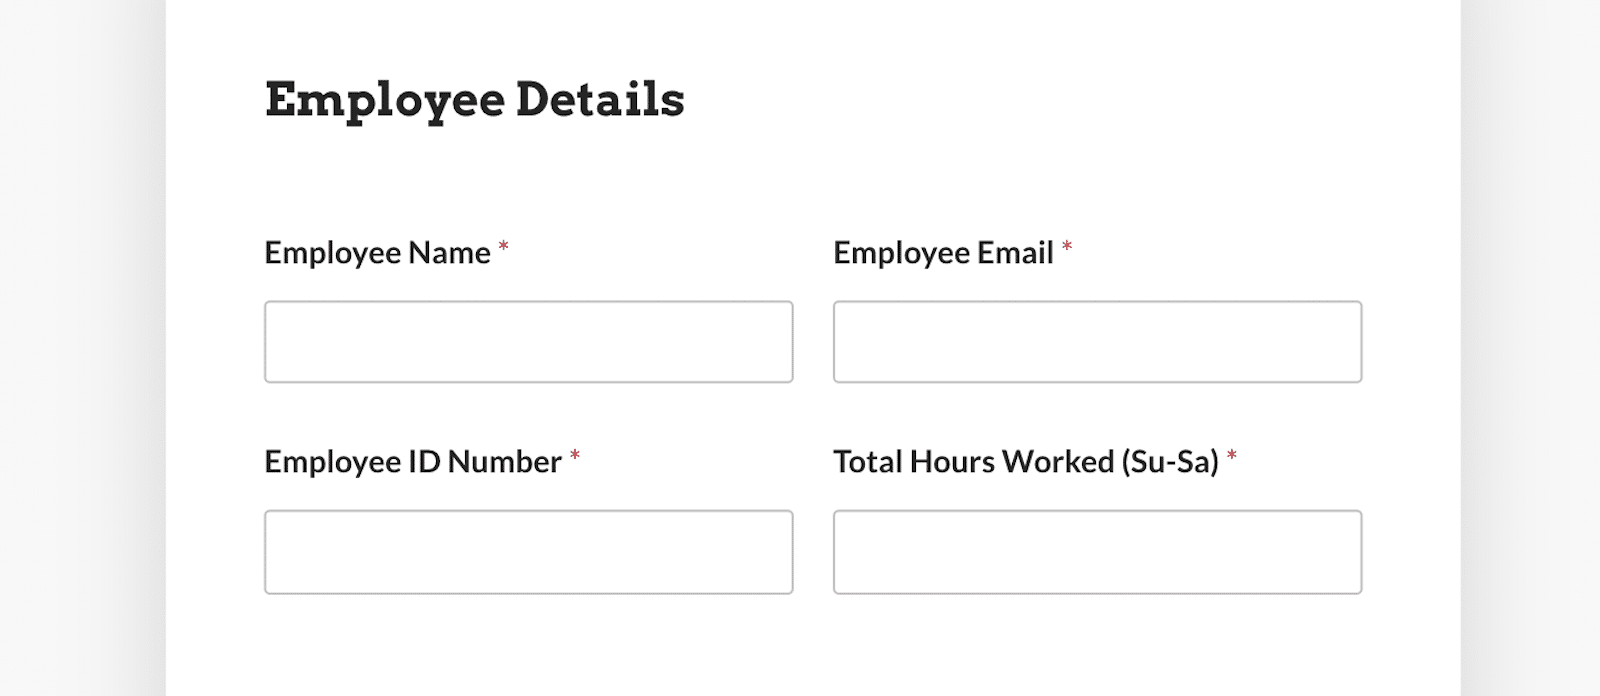 The employee details section of the template